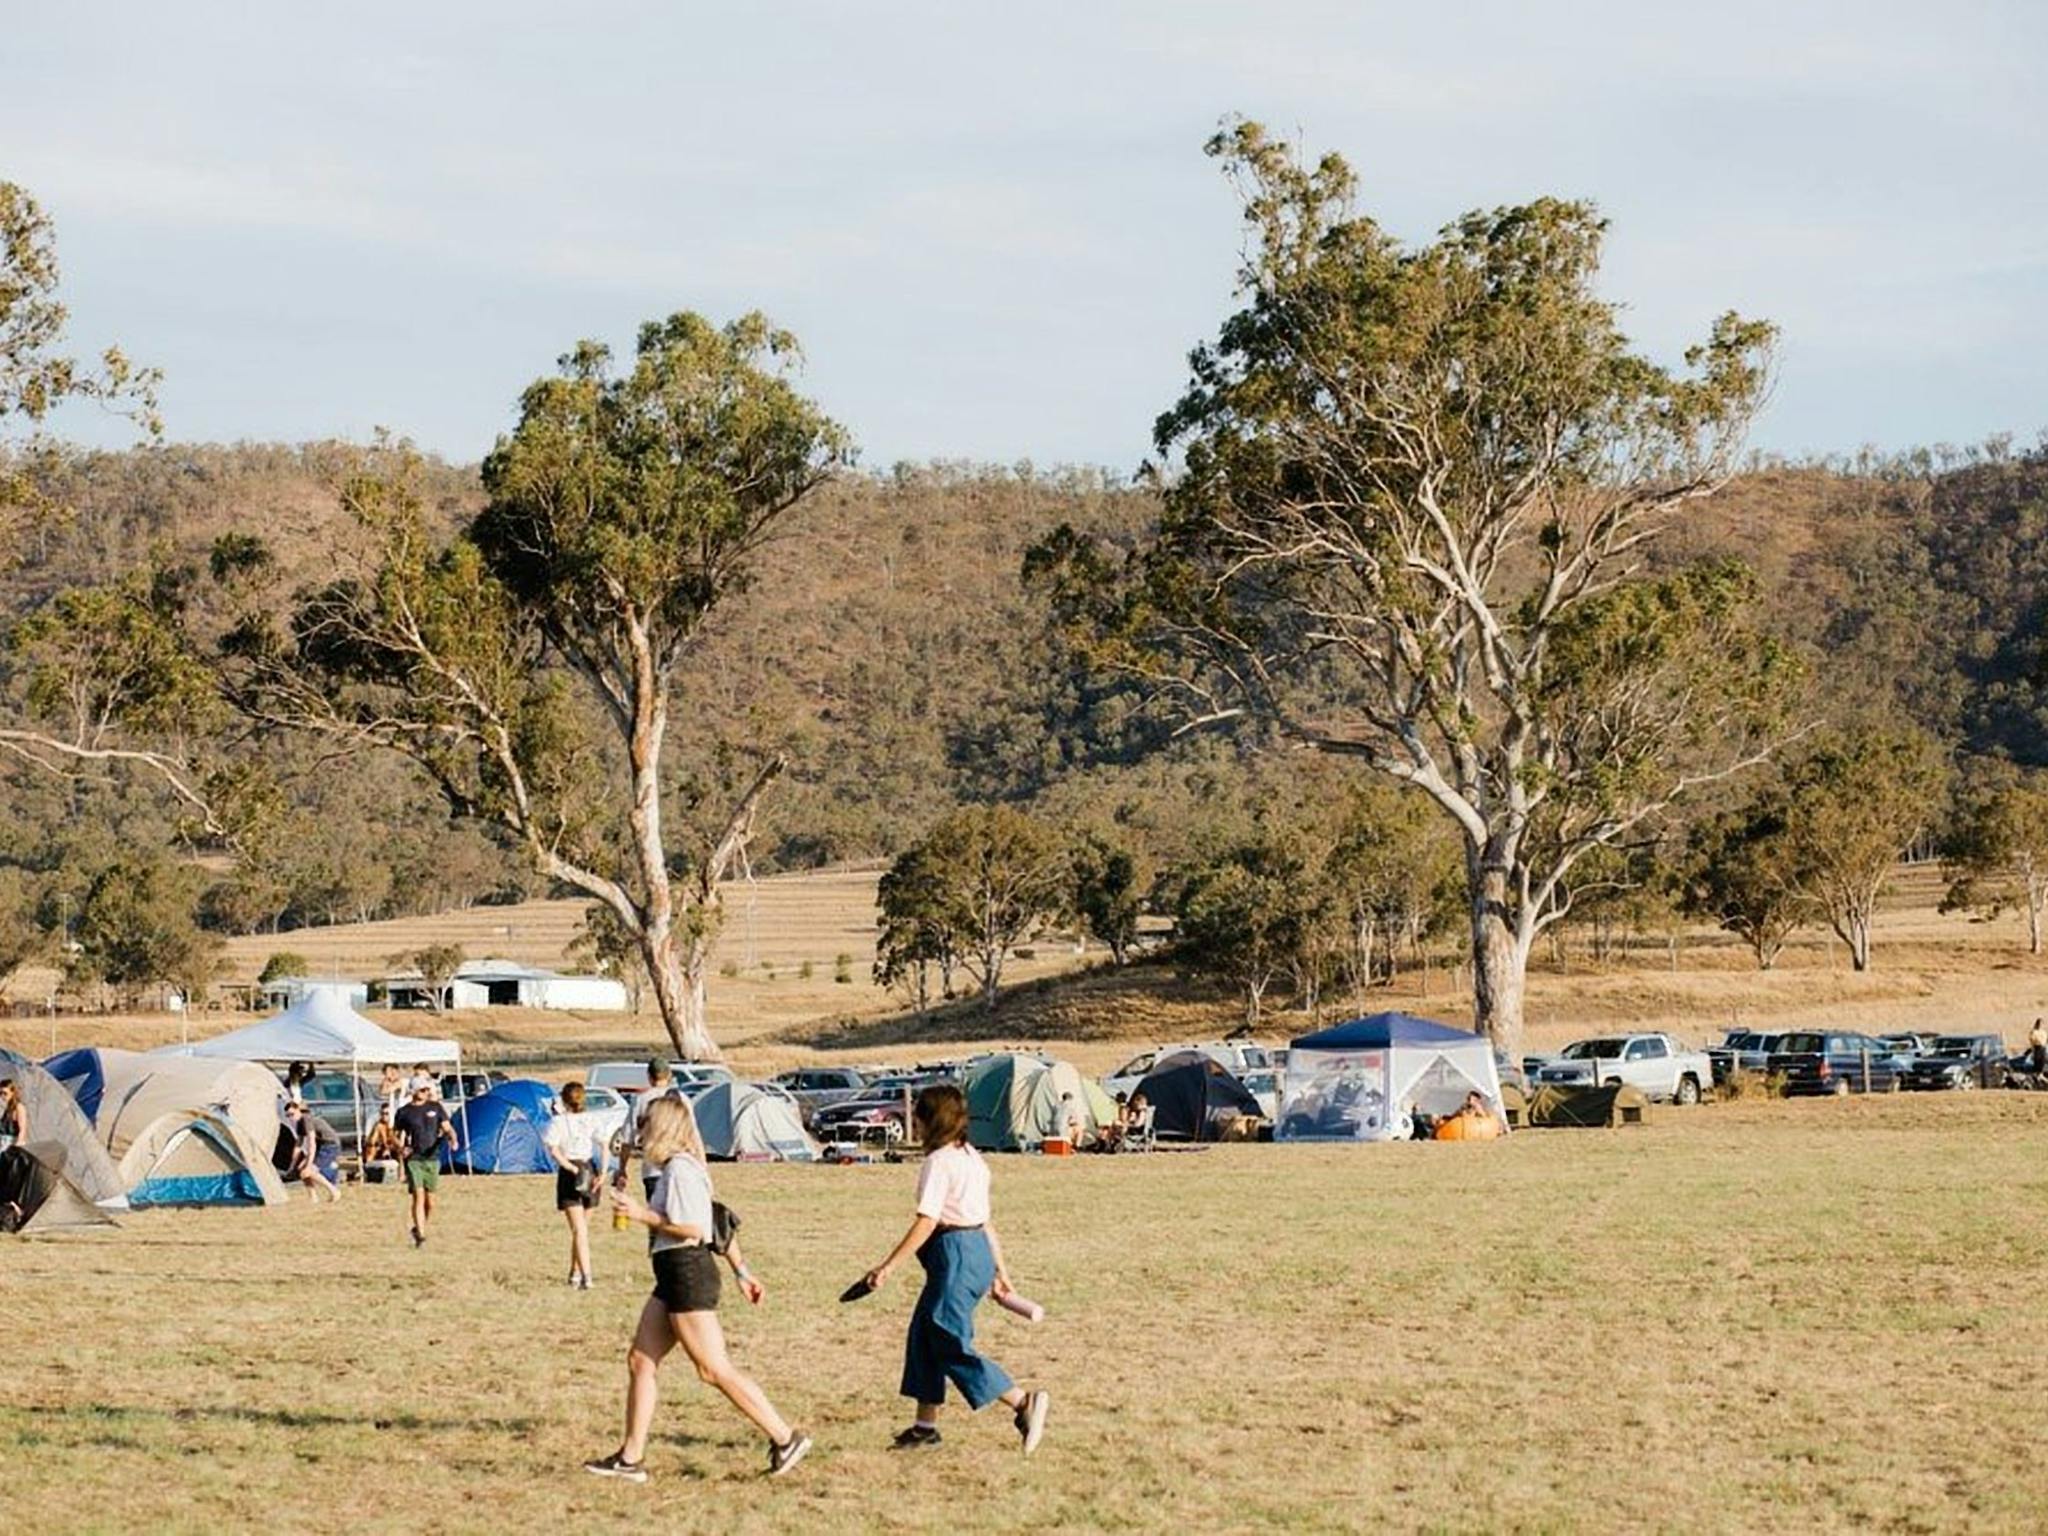 Punters head back to campsite